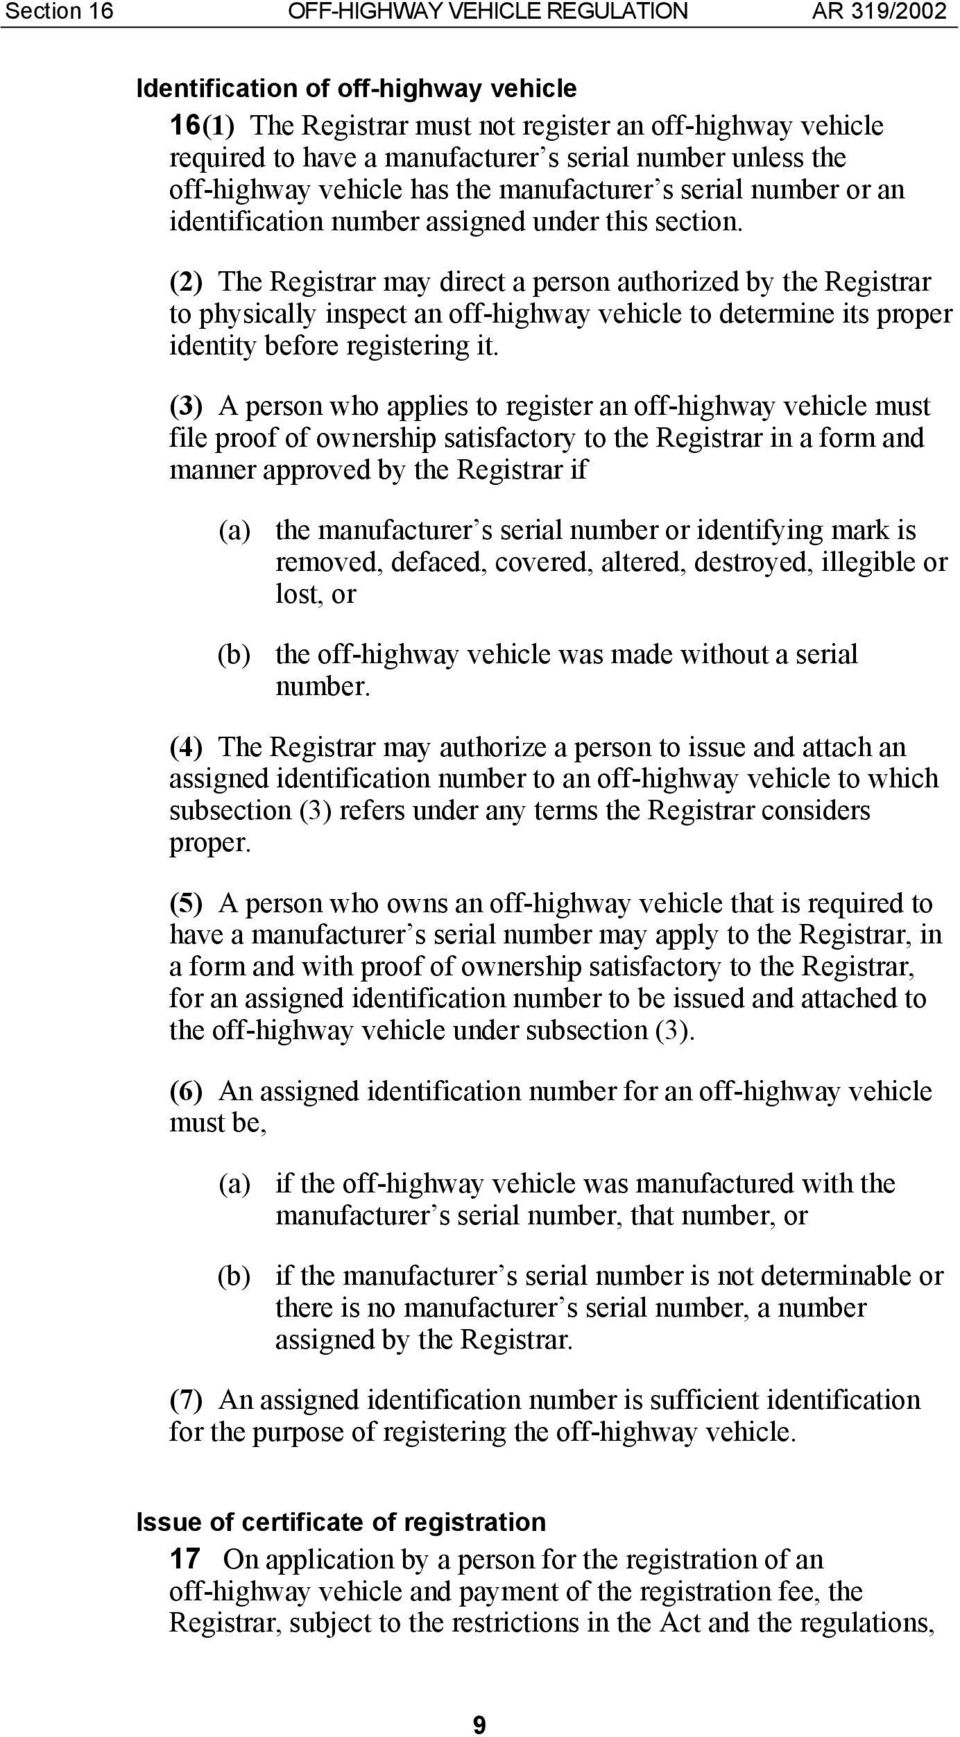 (2) The Registrar may direct a person authorized by the Registrar to physically inspect an off-highway vehicle to determine its proper identity before registering it.